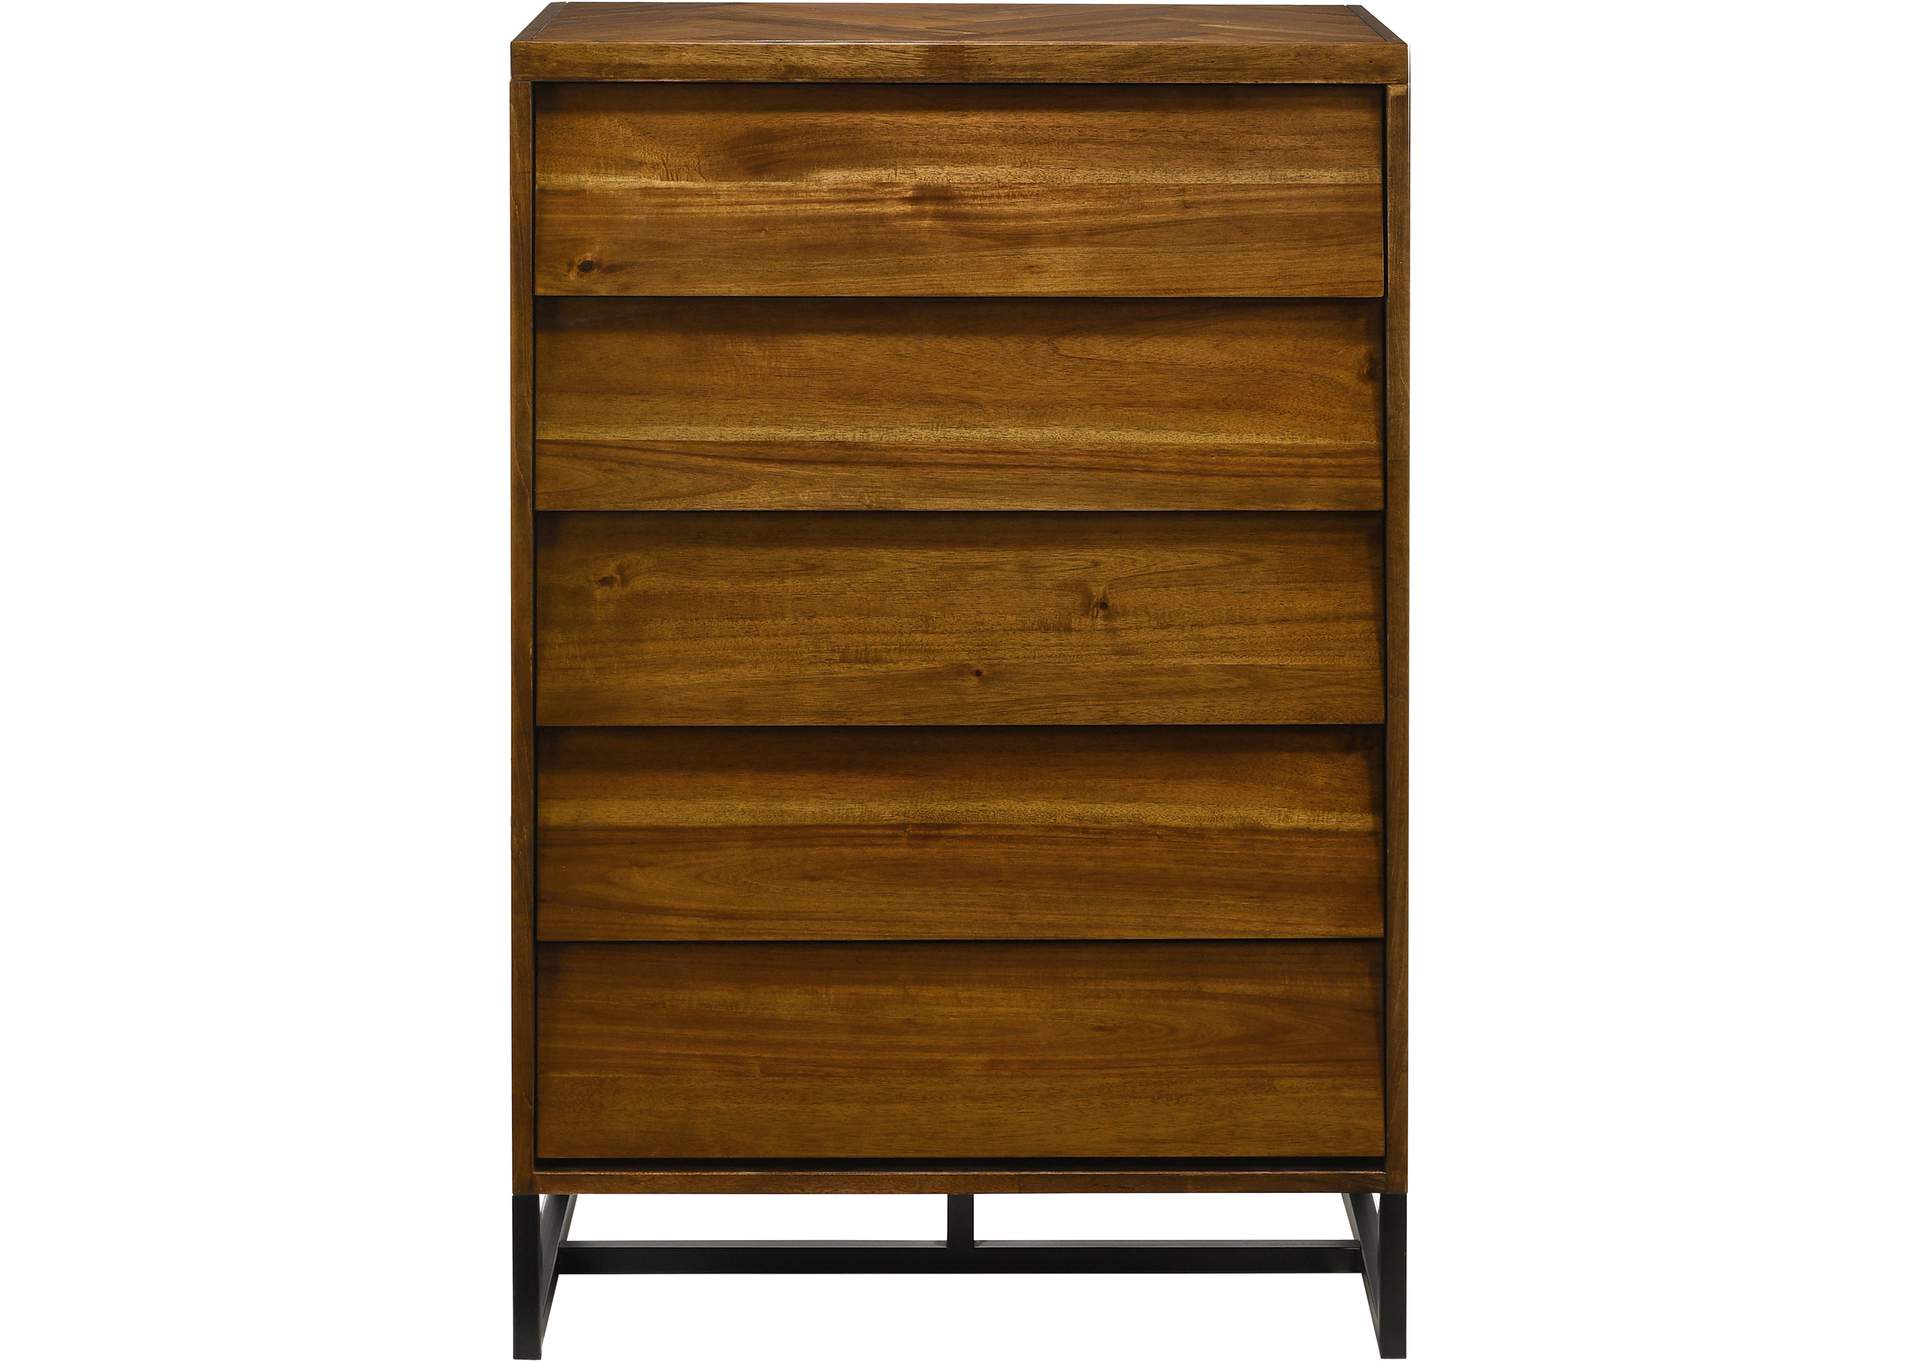 Reed Antique Coffee Chest,Meridian Furniture